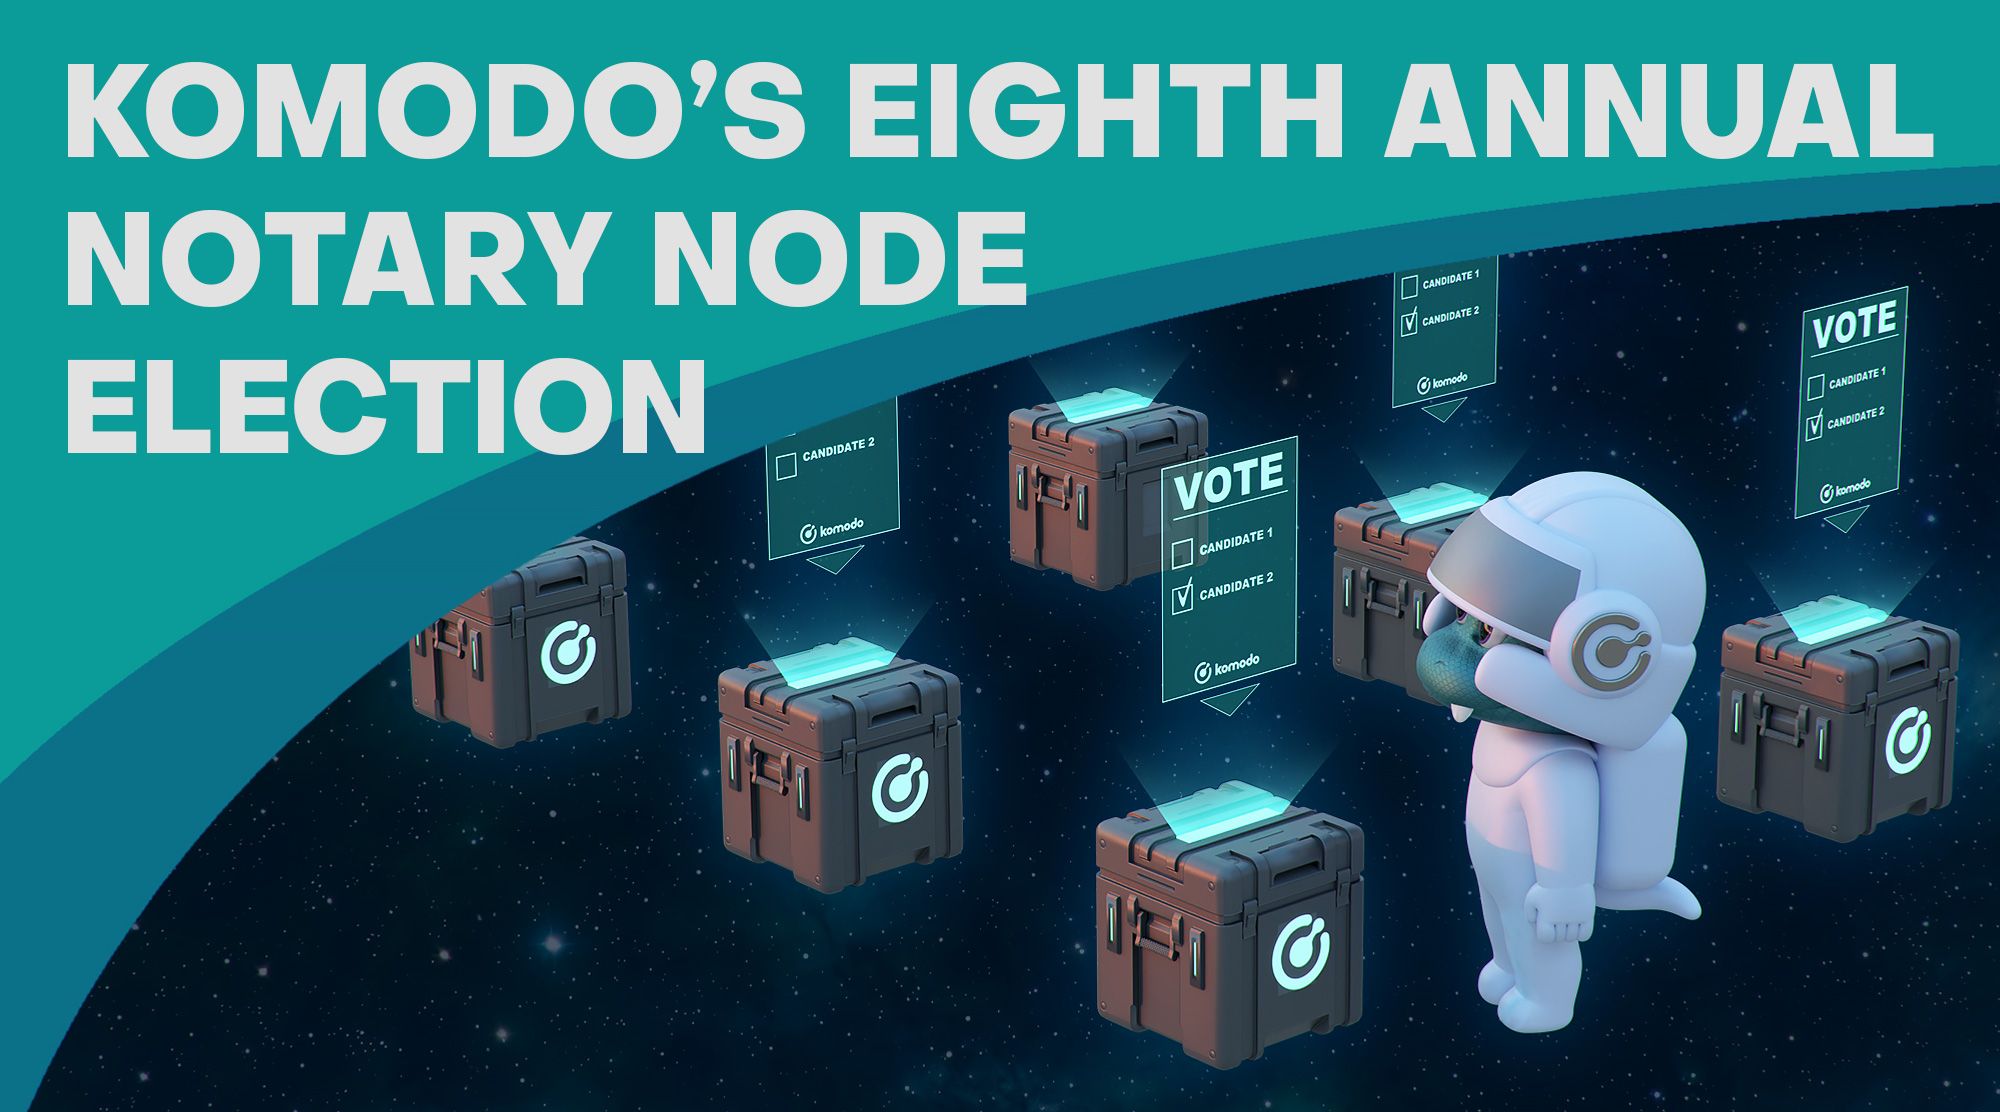 Komodo’s Eighth Annual Notary Node Election